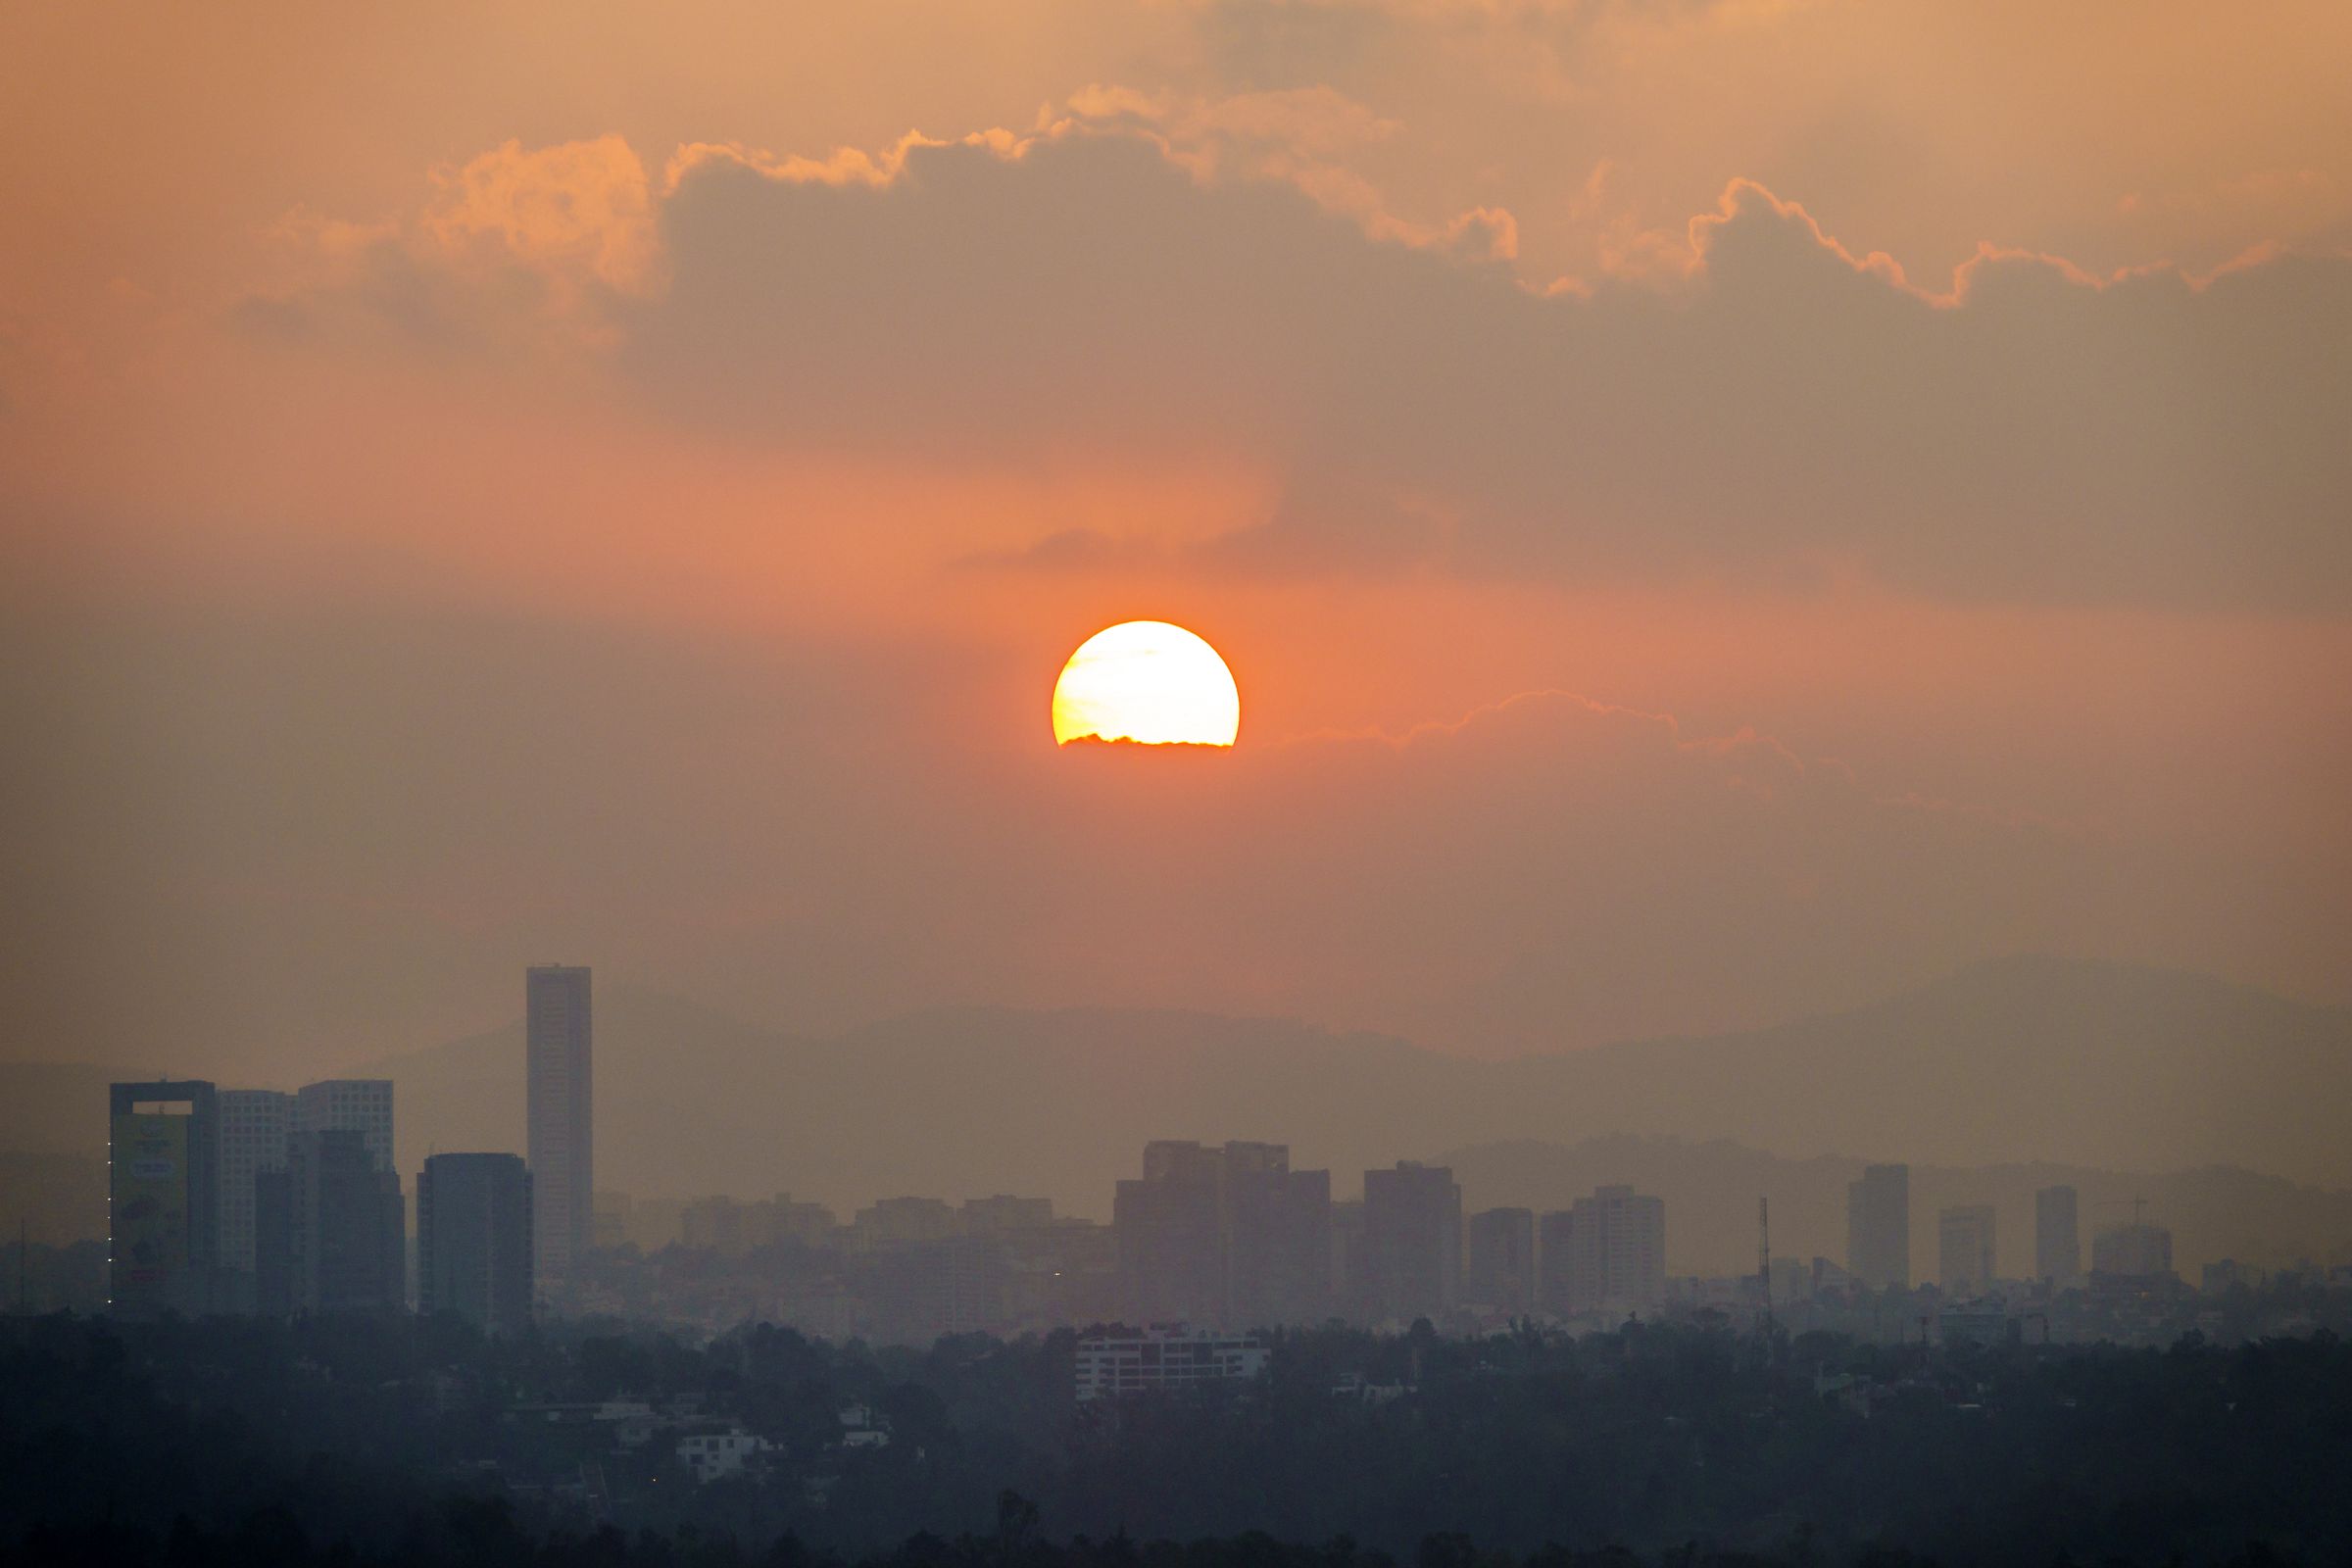 The city skyline at sunset, hazy with pollution.